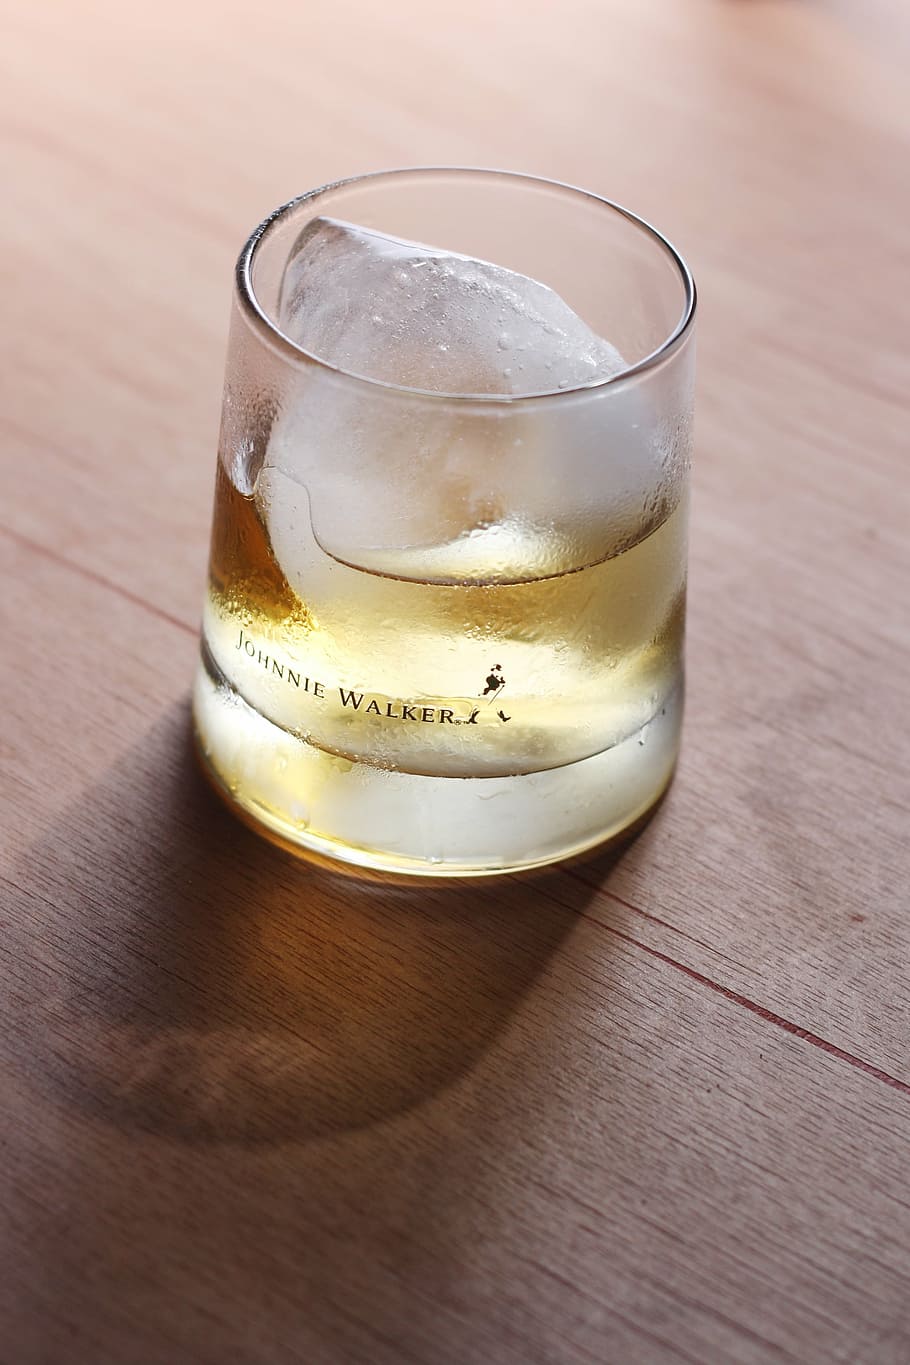 Johnnie Walker glass with beverage with ice, whiskey, whisky